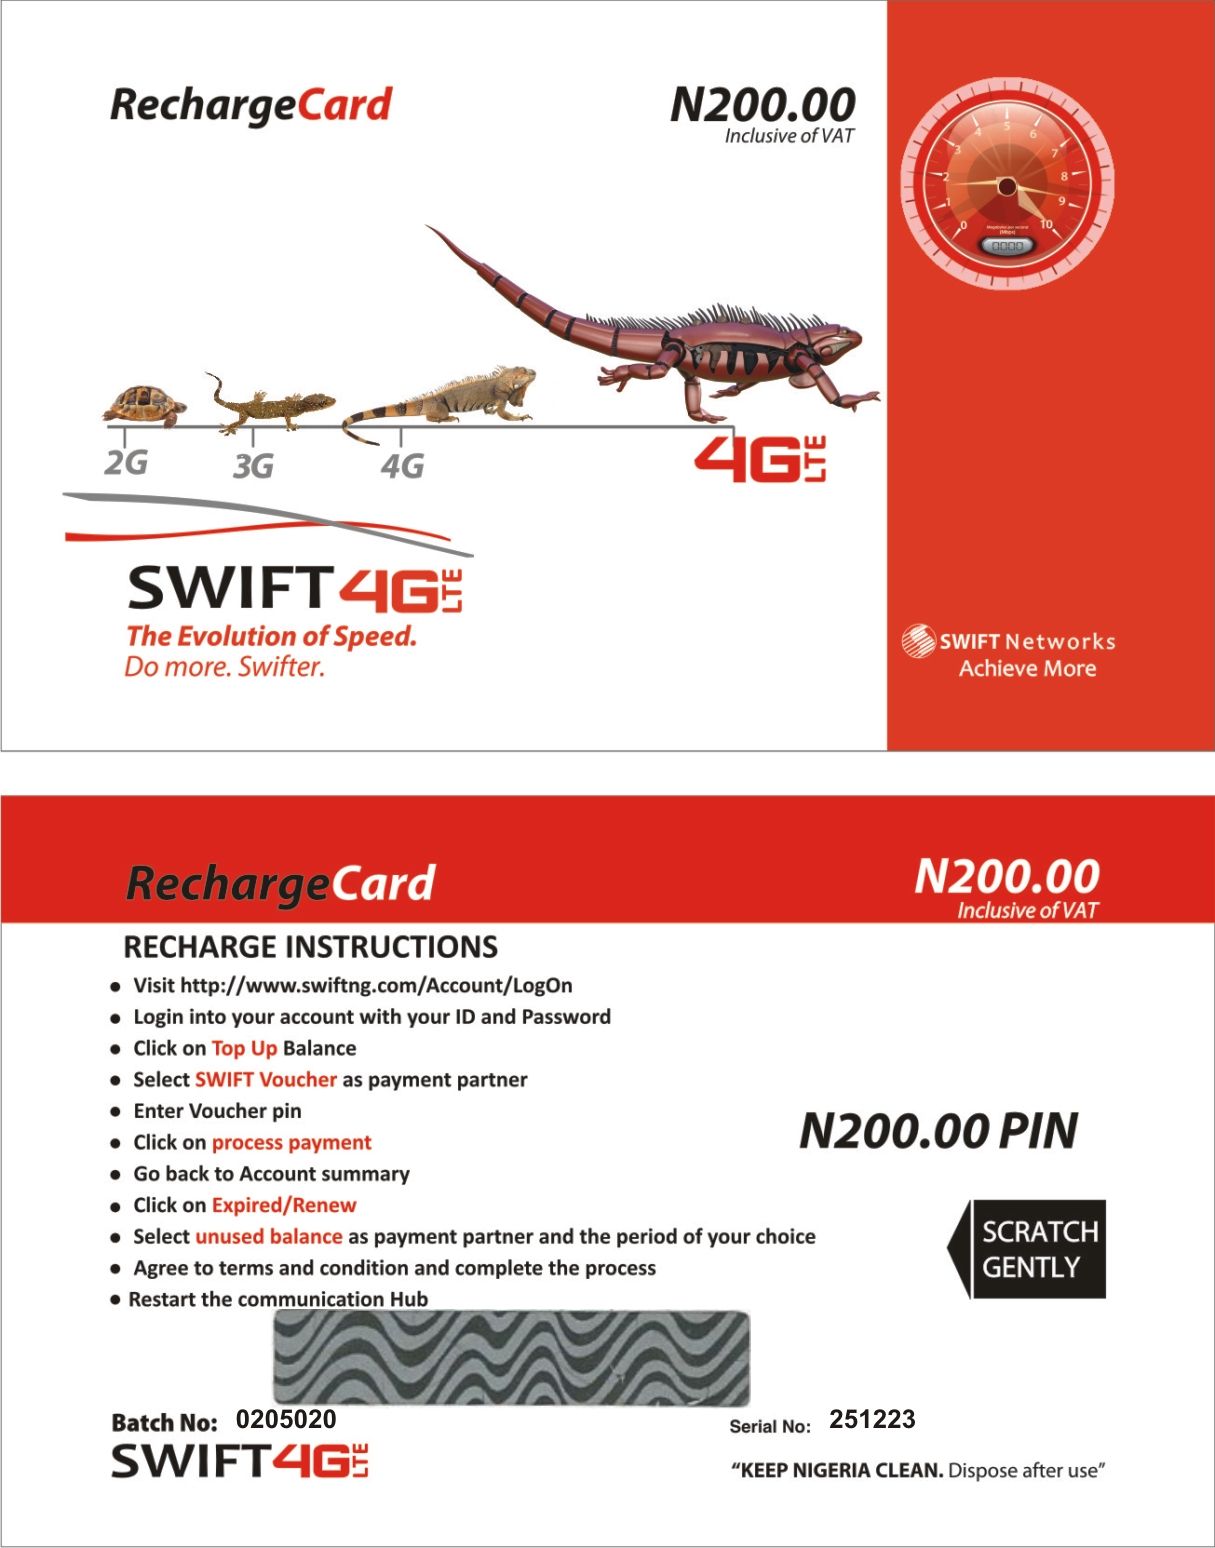 PRINT SUBSCRIPTION SCRATCH CARDS CALL EMMANUEL ON 08176499649